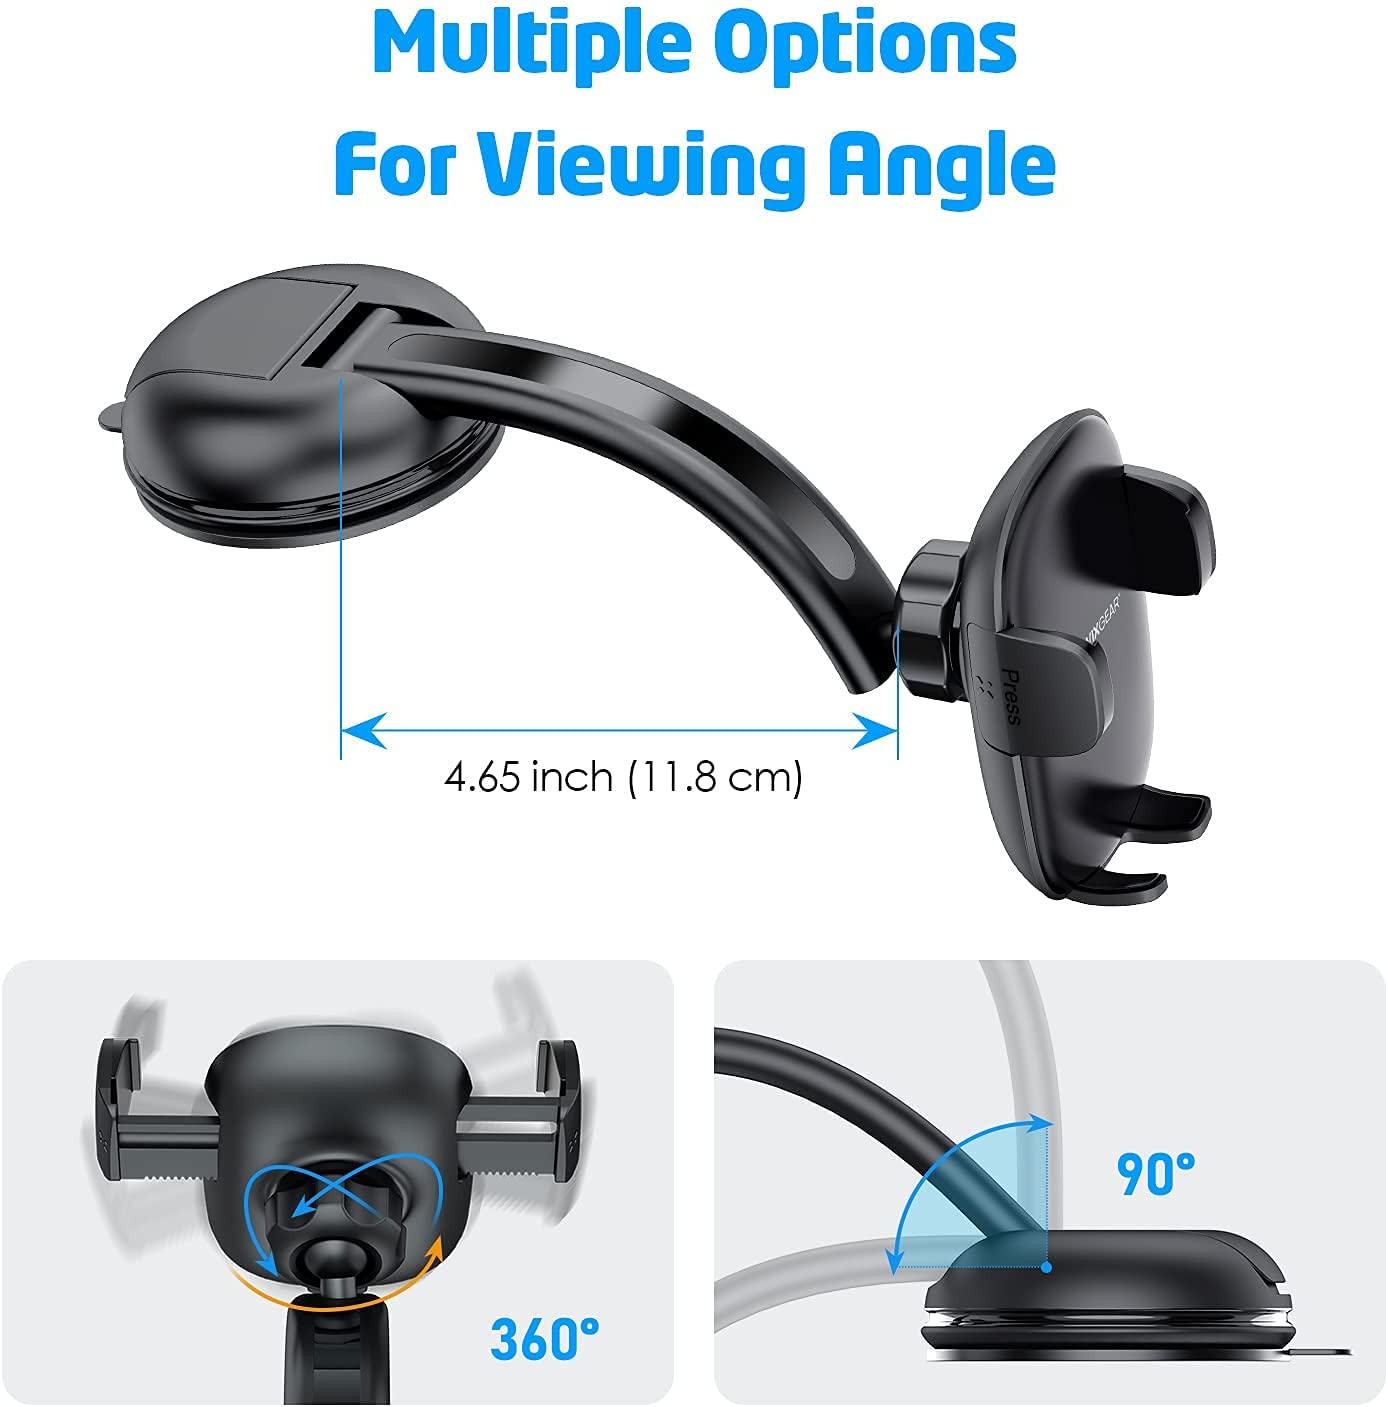 WixGear Universal Dashboard Curved Phone Car Suction Mount Holder for Car 360 Degree Rotation Compatible with All Phones